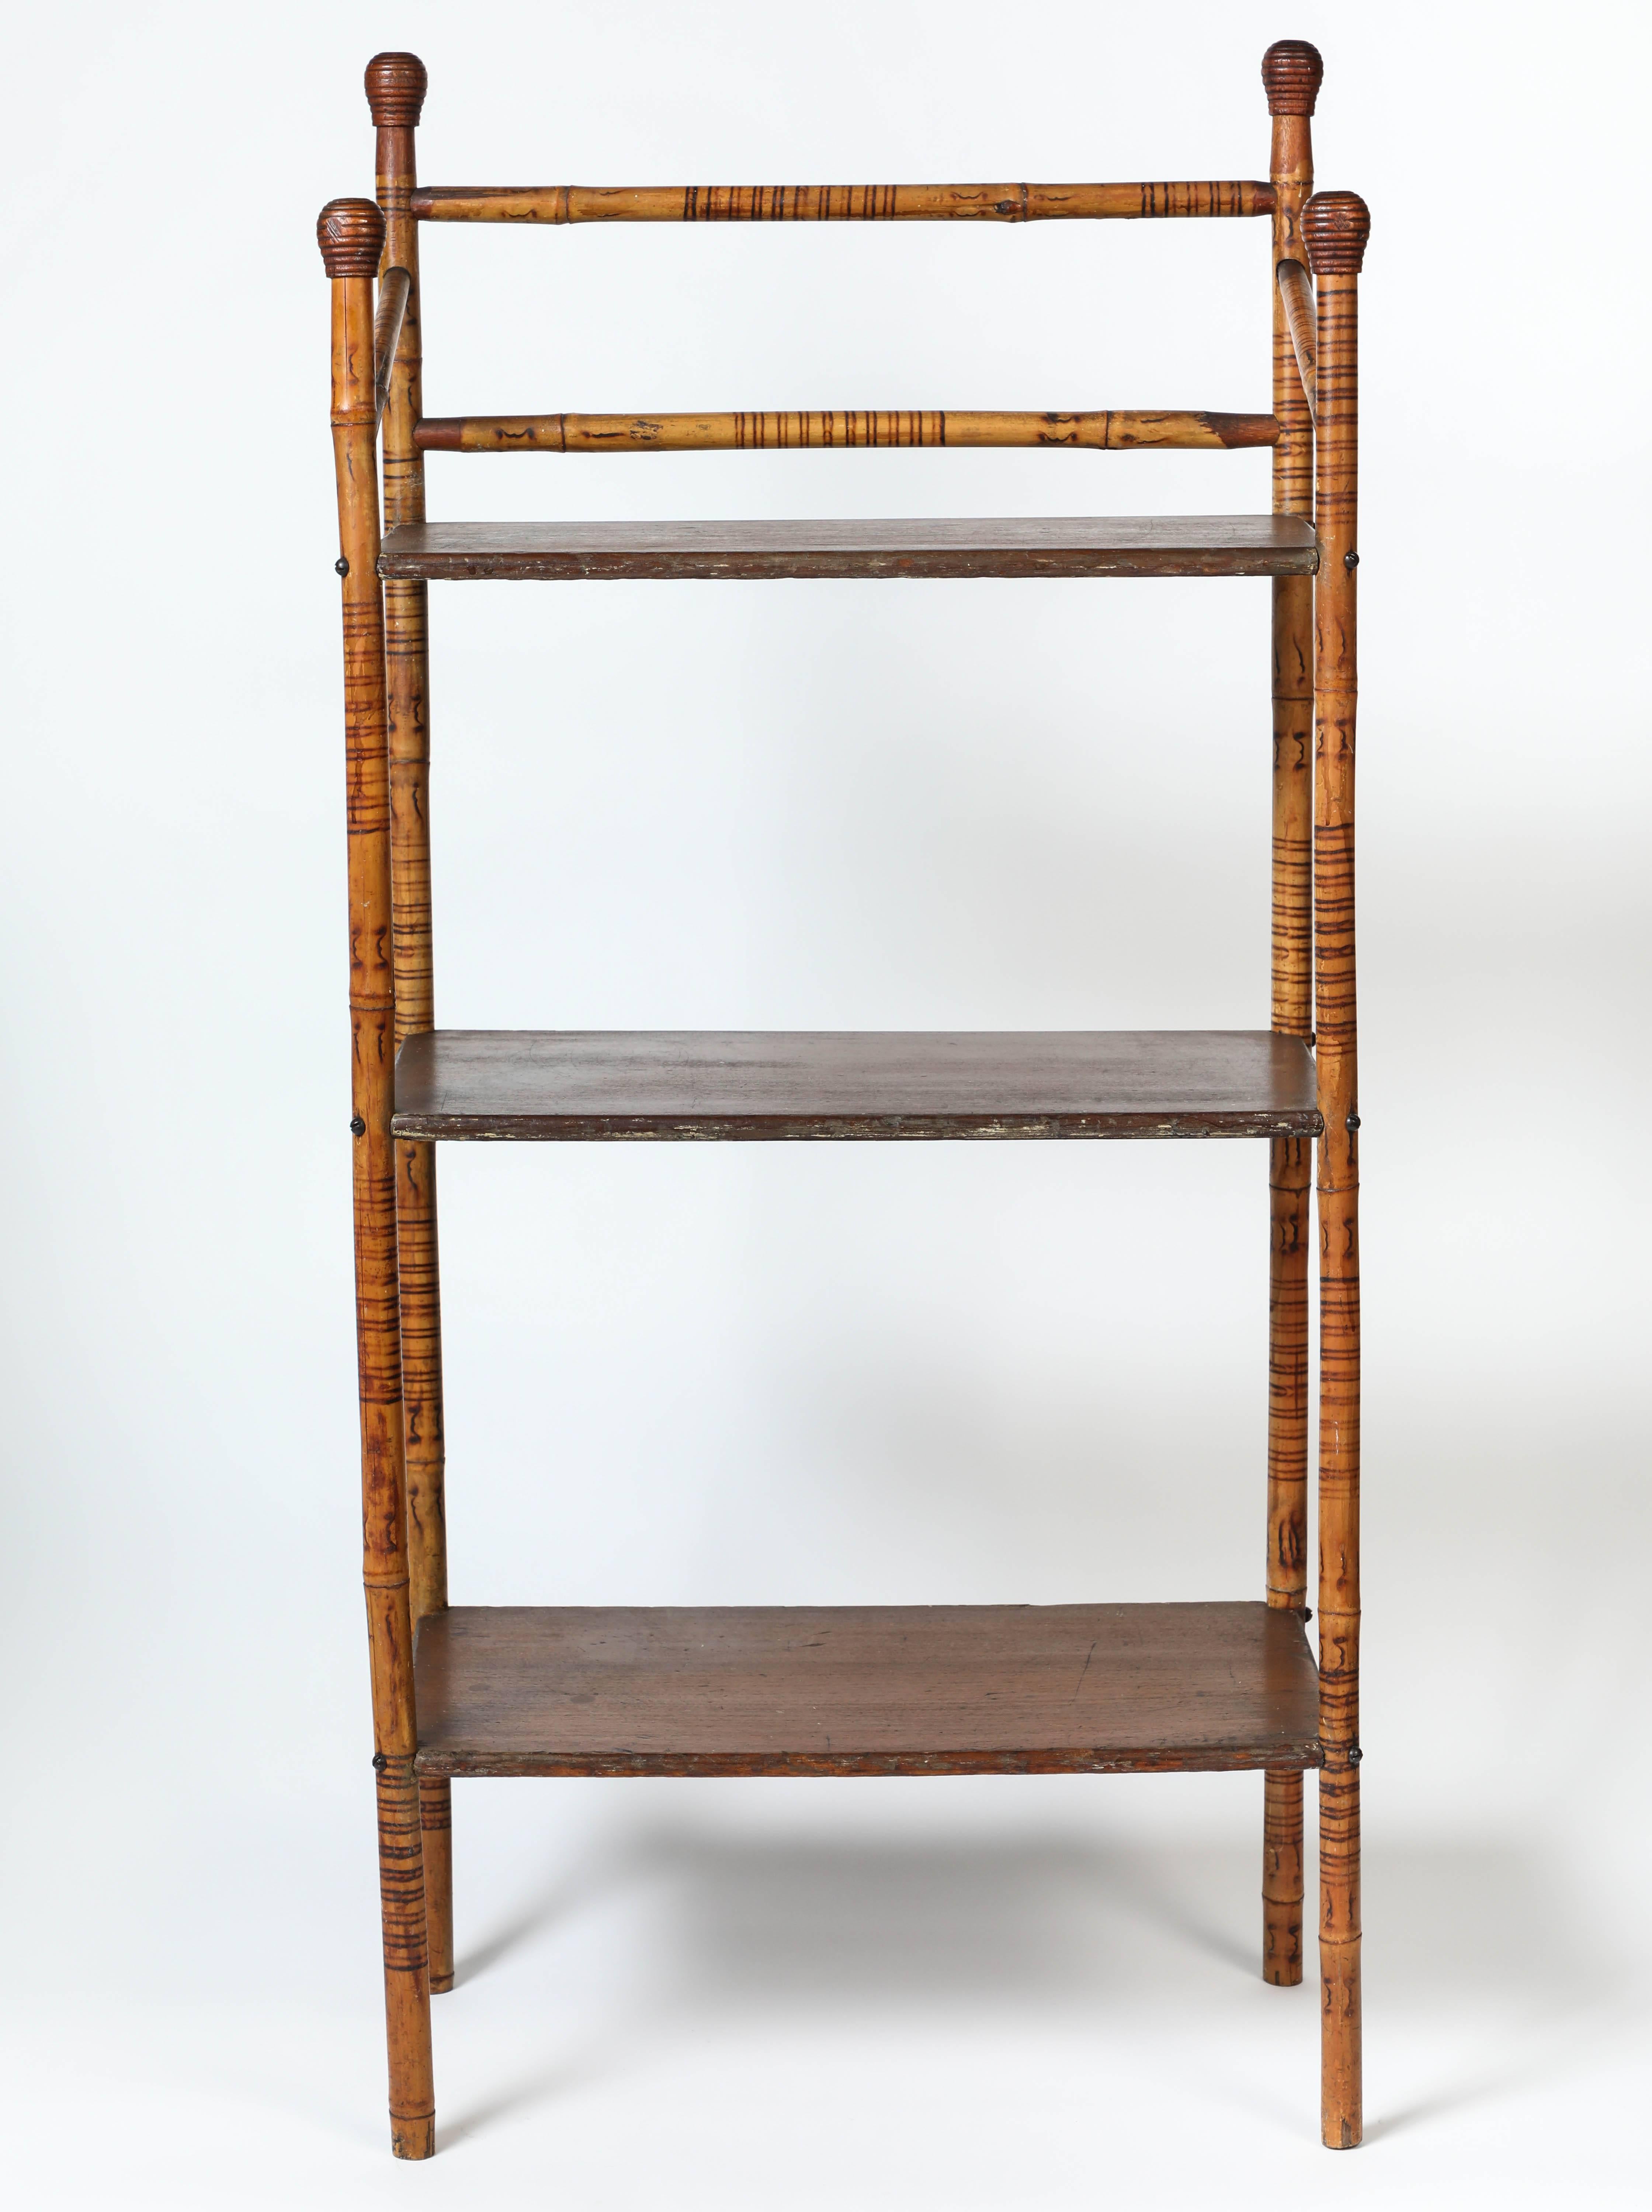 Beautiful and classic antique bamboo frame standing shelf.